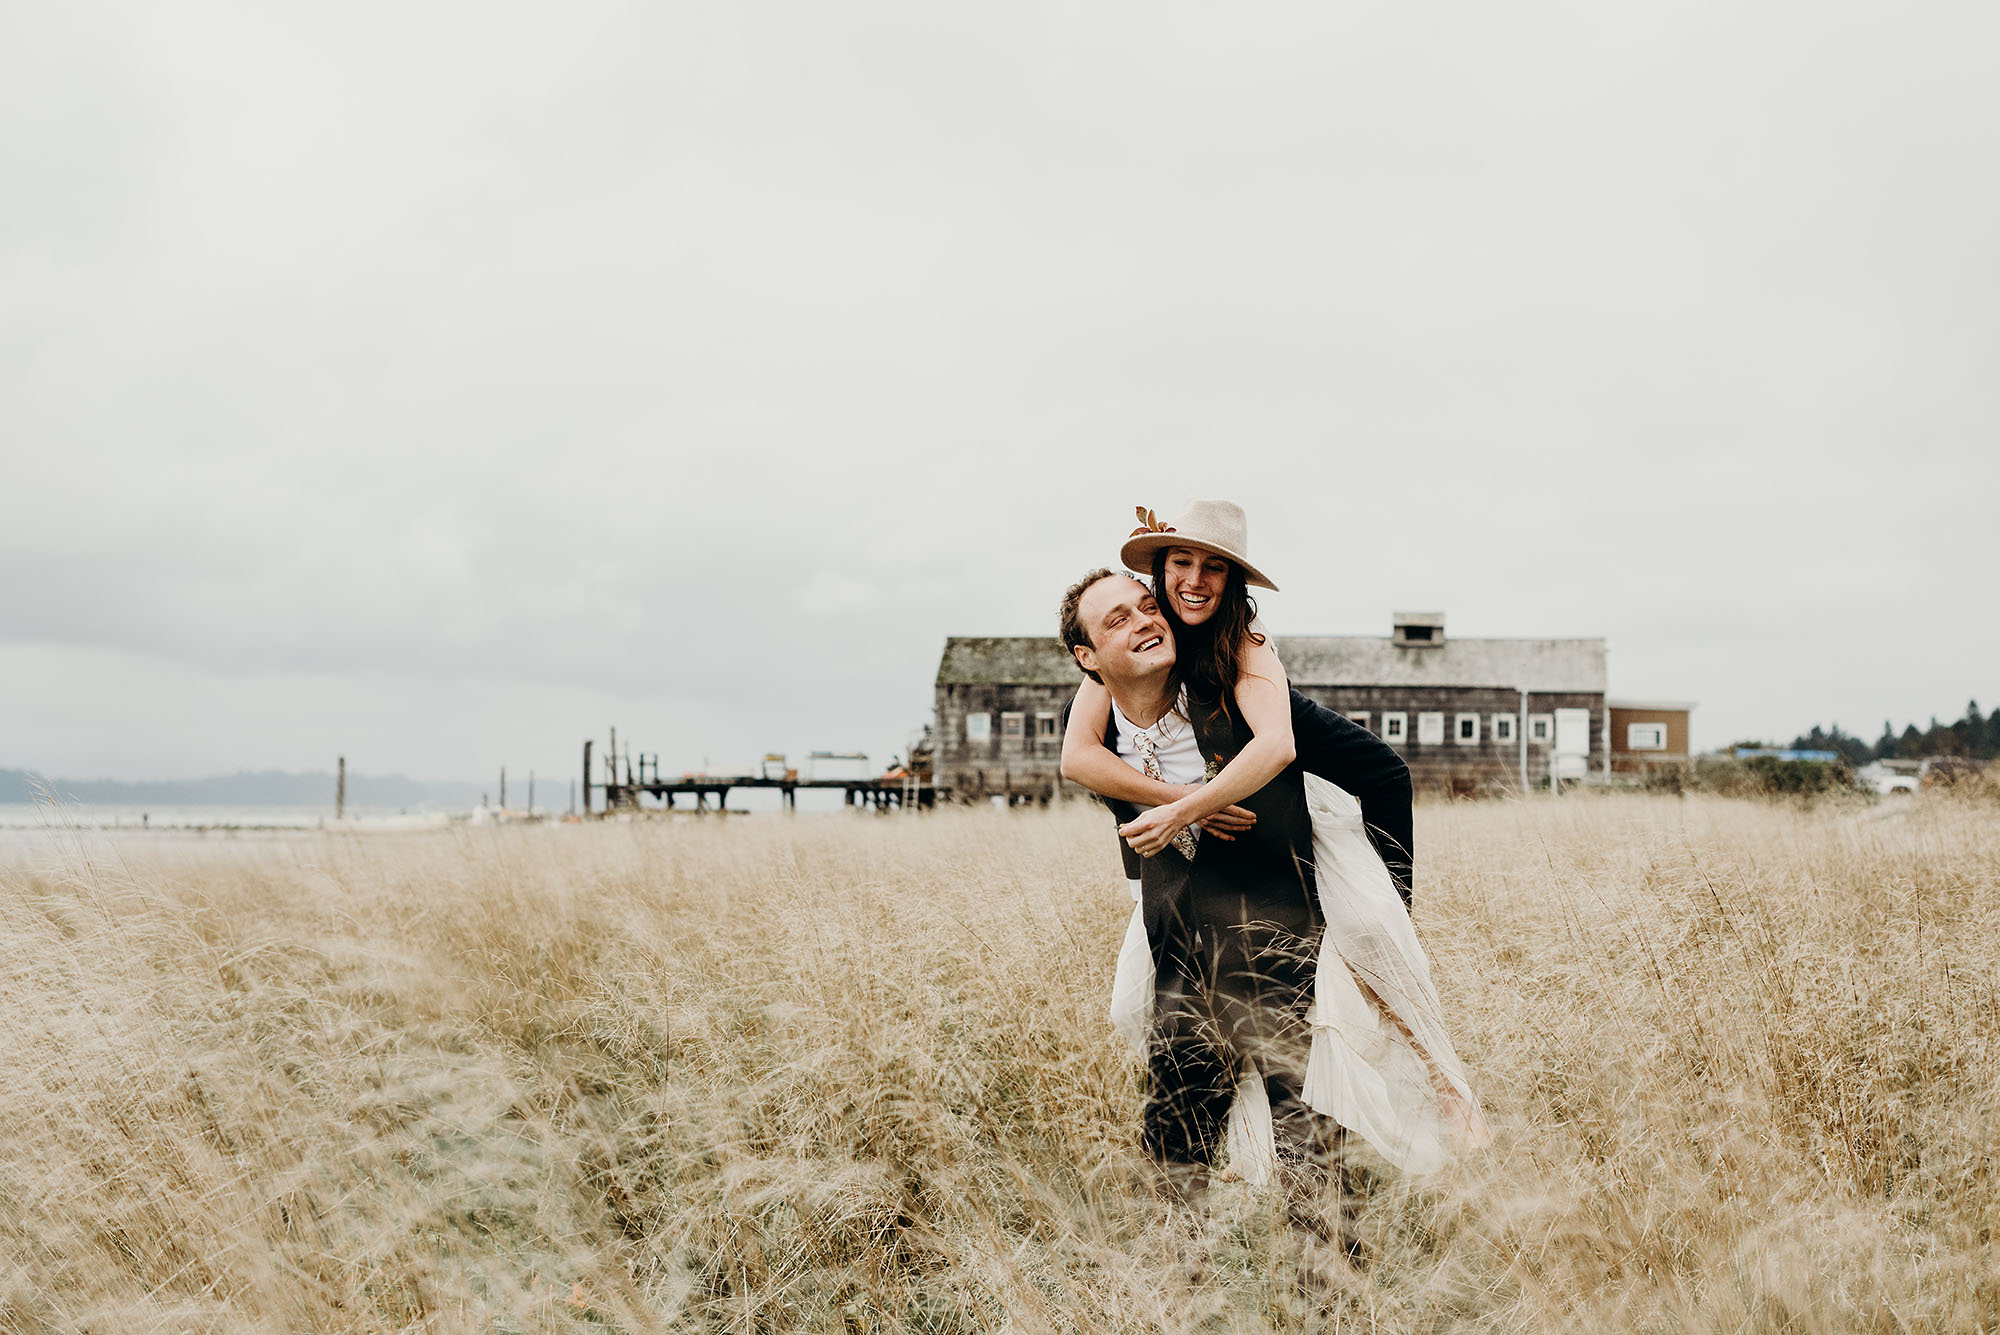 Groom Giving Bride a Piggyback Ride on the Beach by Briana Morrison Photography